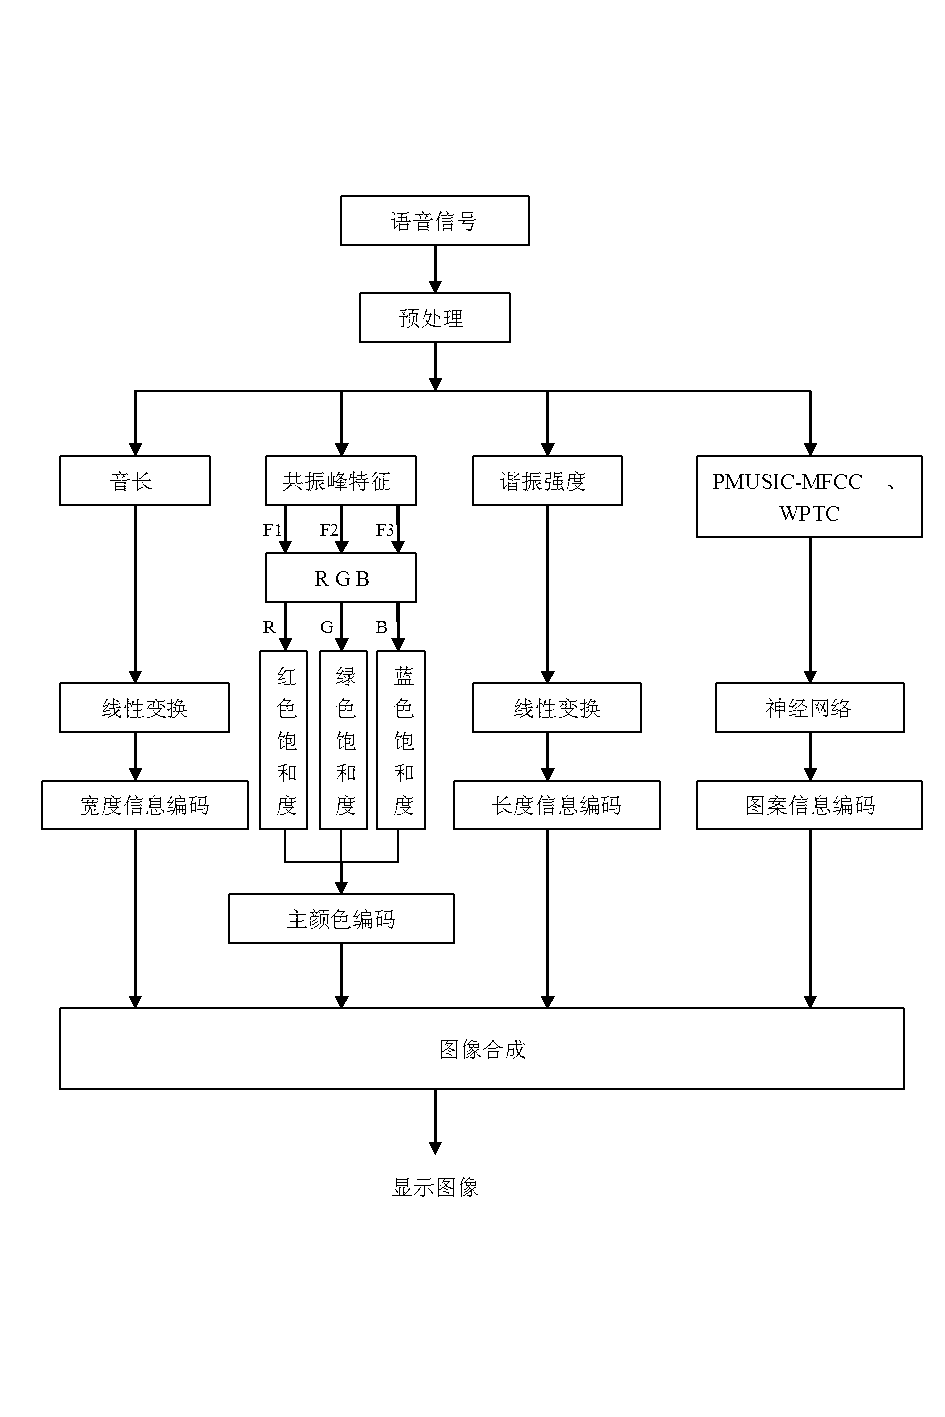 Chinese initial and final visualization method based on combination feature